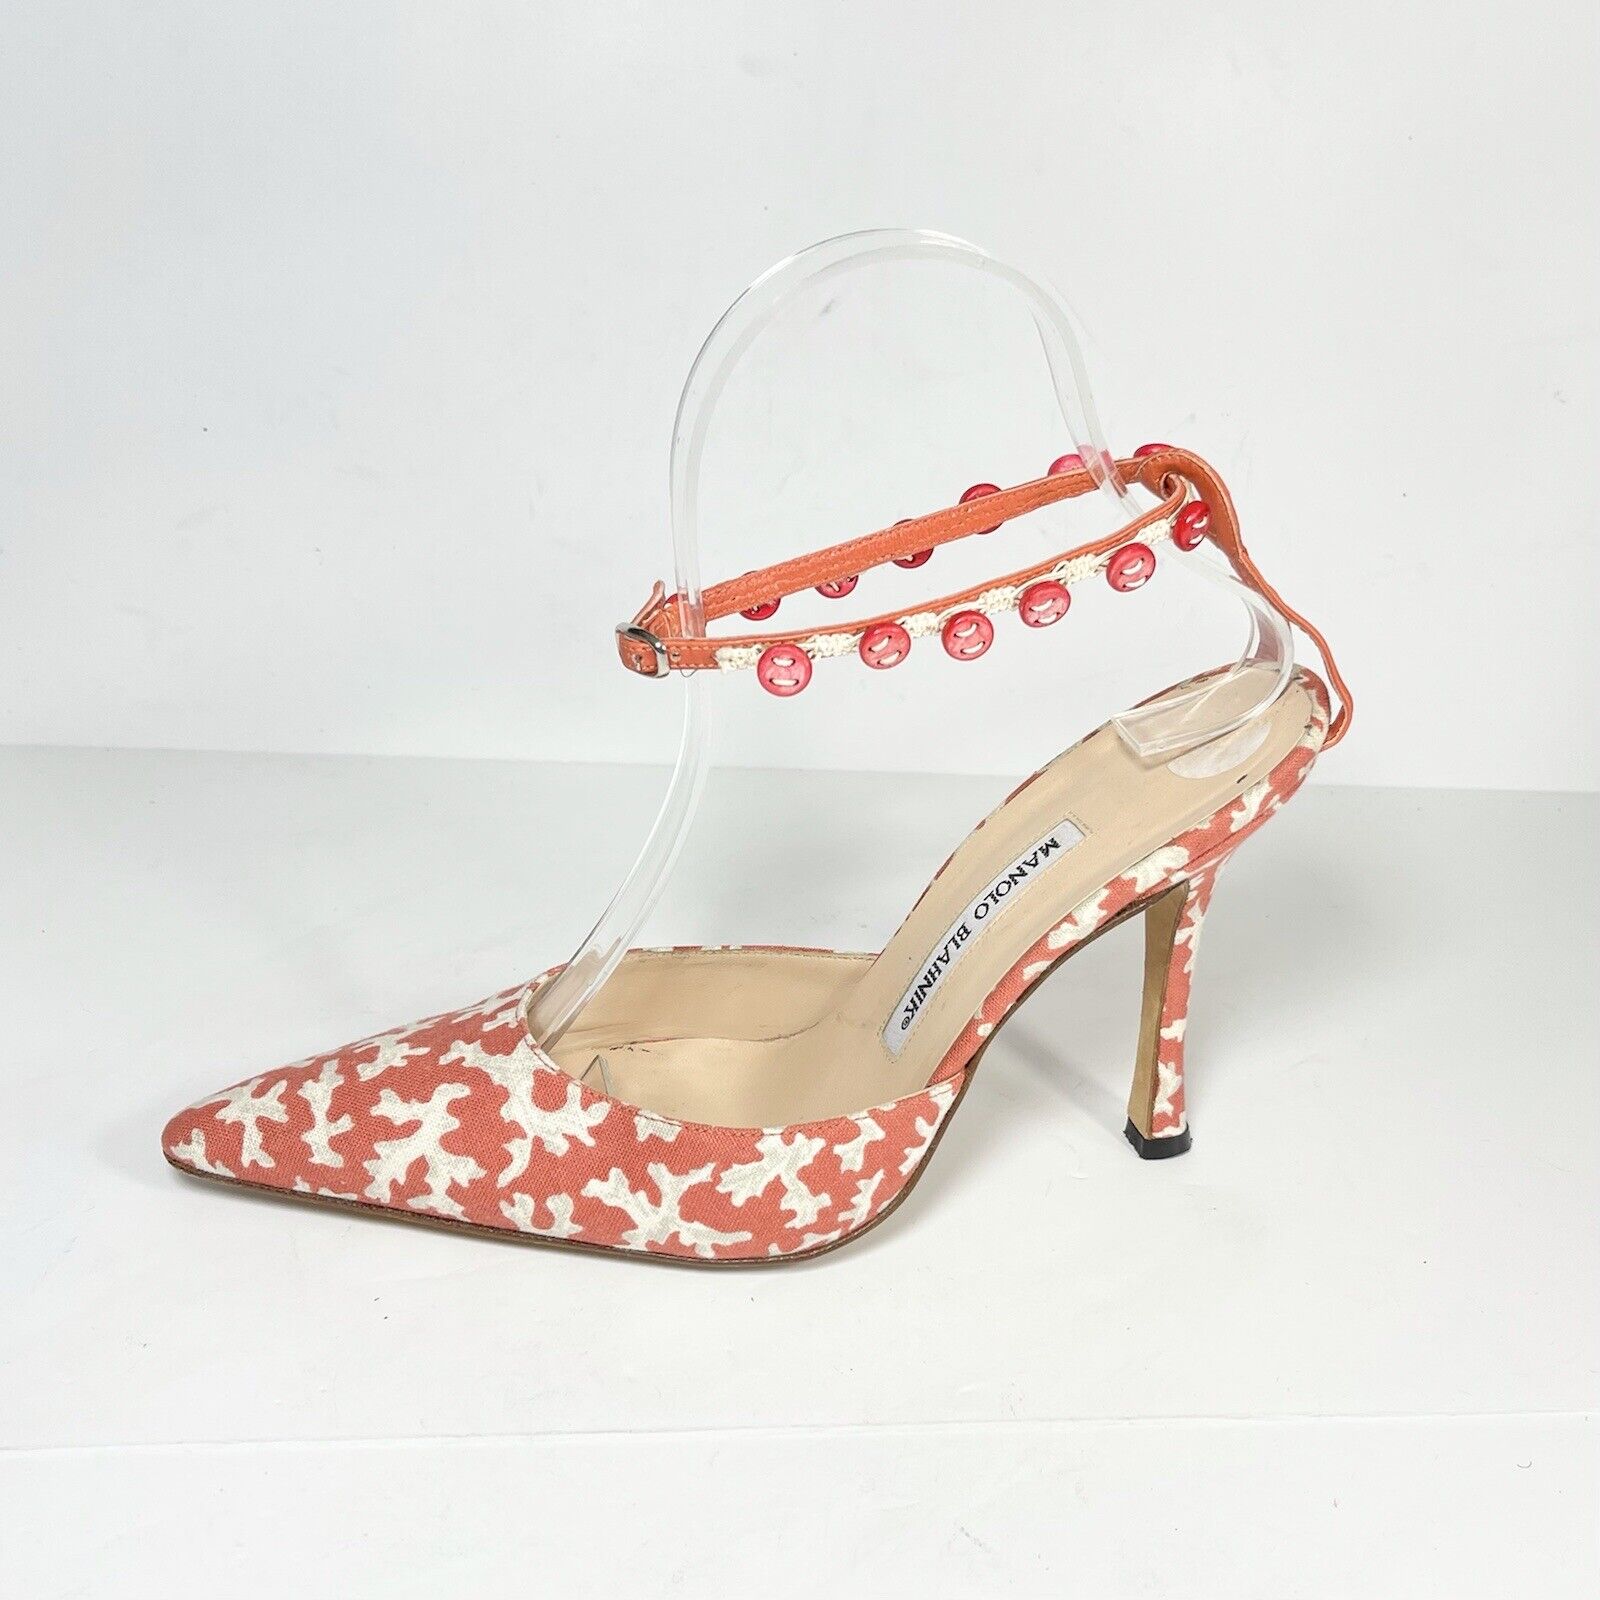 Manolo Blahnik Women’s Pumps Pointed Toe Ankle Strap Floral Fabric Size 38.5